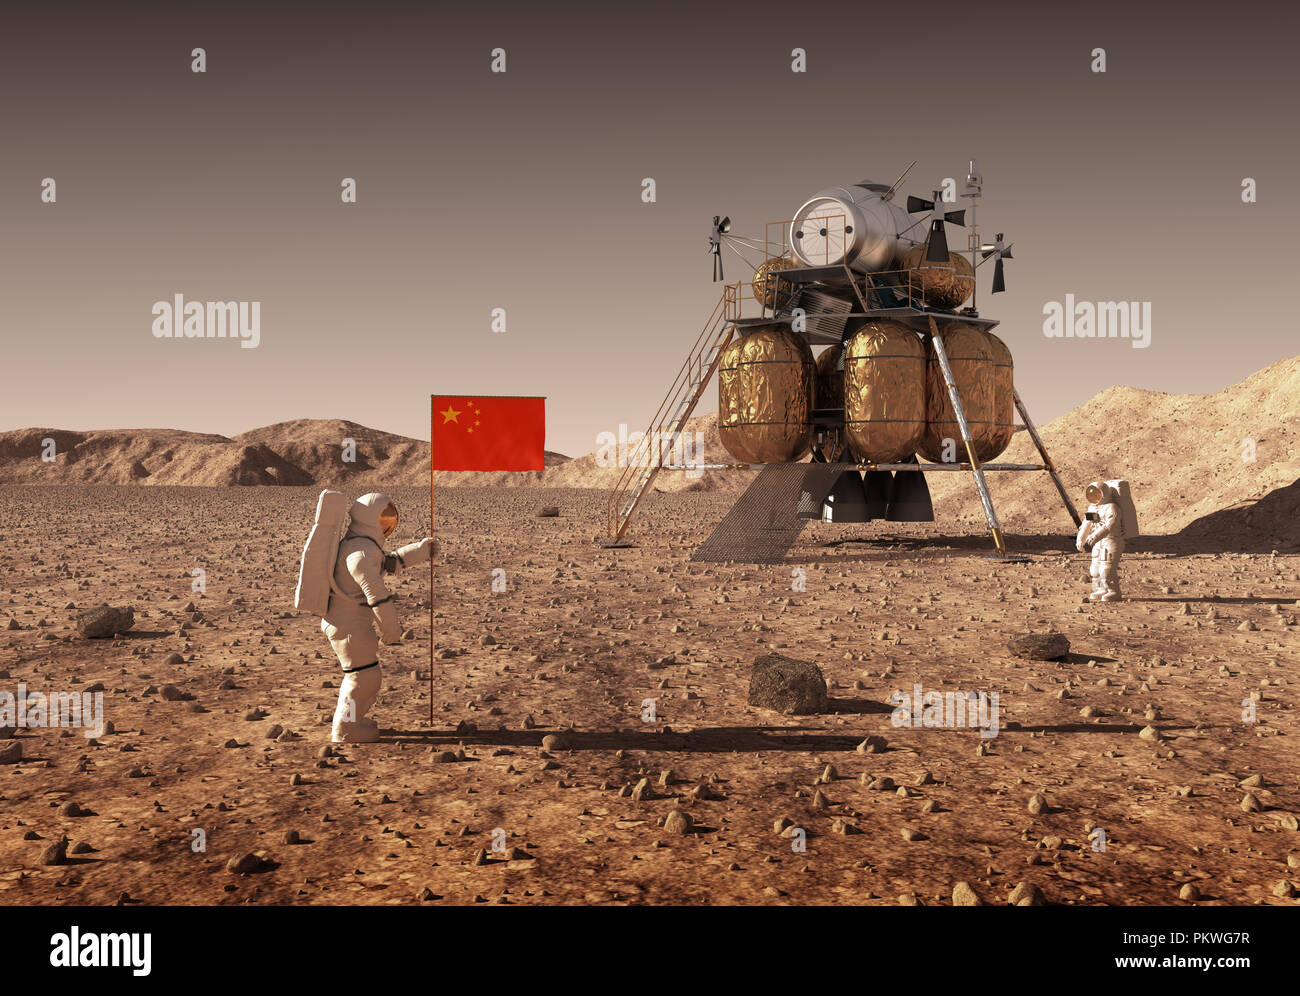 Astronauts Set An Chinese Flag On The Planet Mars. 3D Illustration. Stock Photo